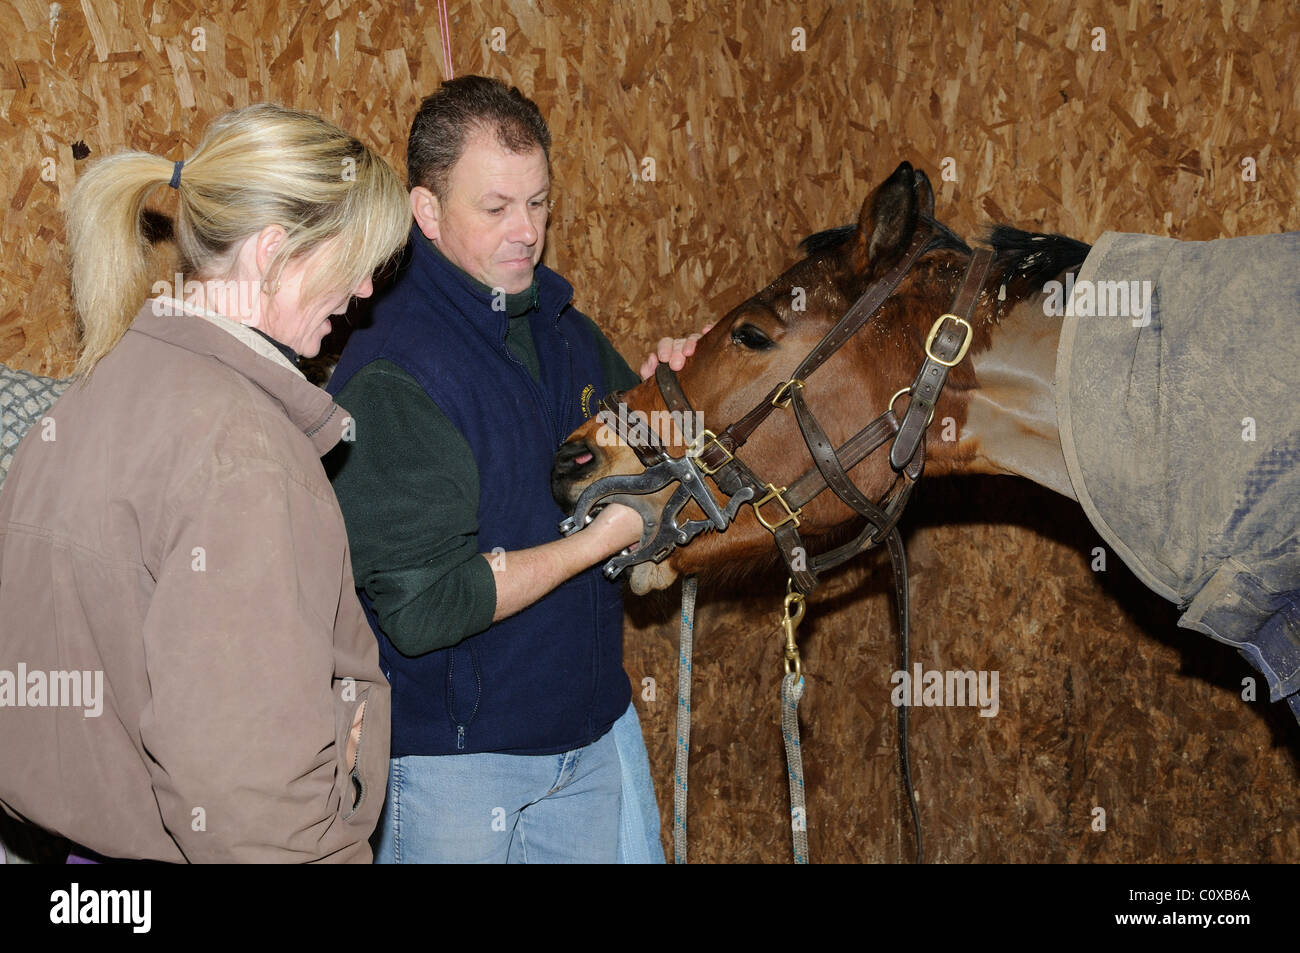 Horse dentist inserts his hand through a stainless steel mouth speculum into the horse's mouth ready to file teeth. The mouth is Stock Photo